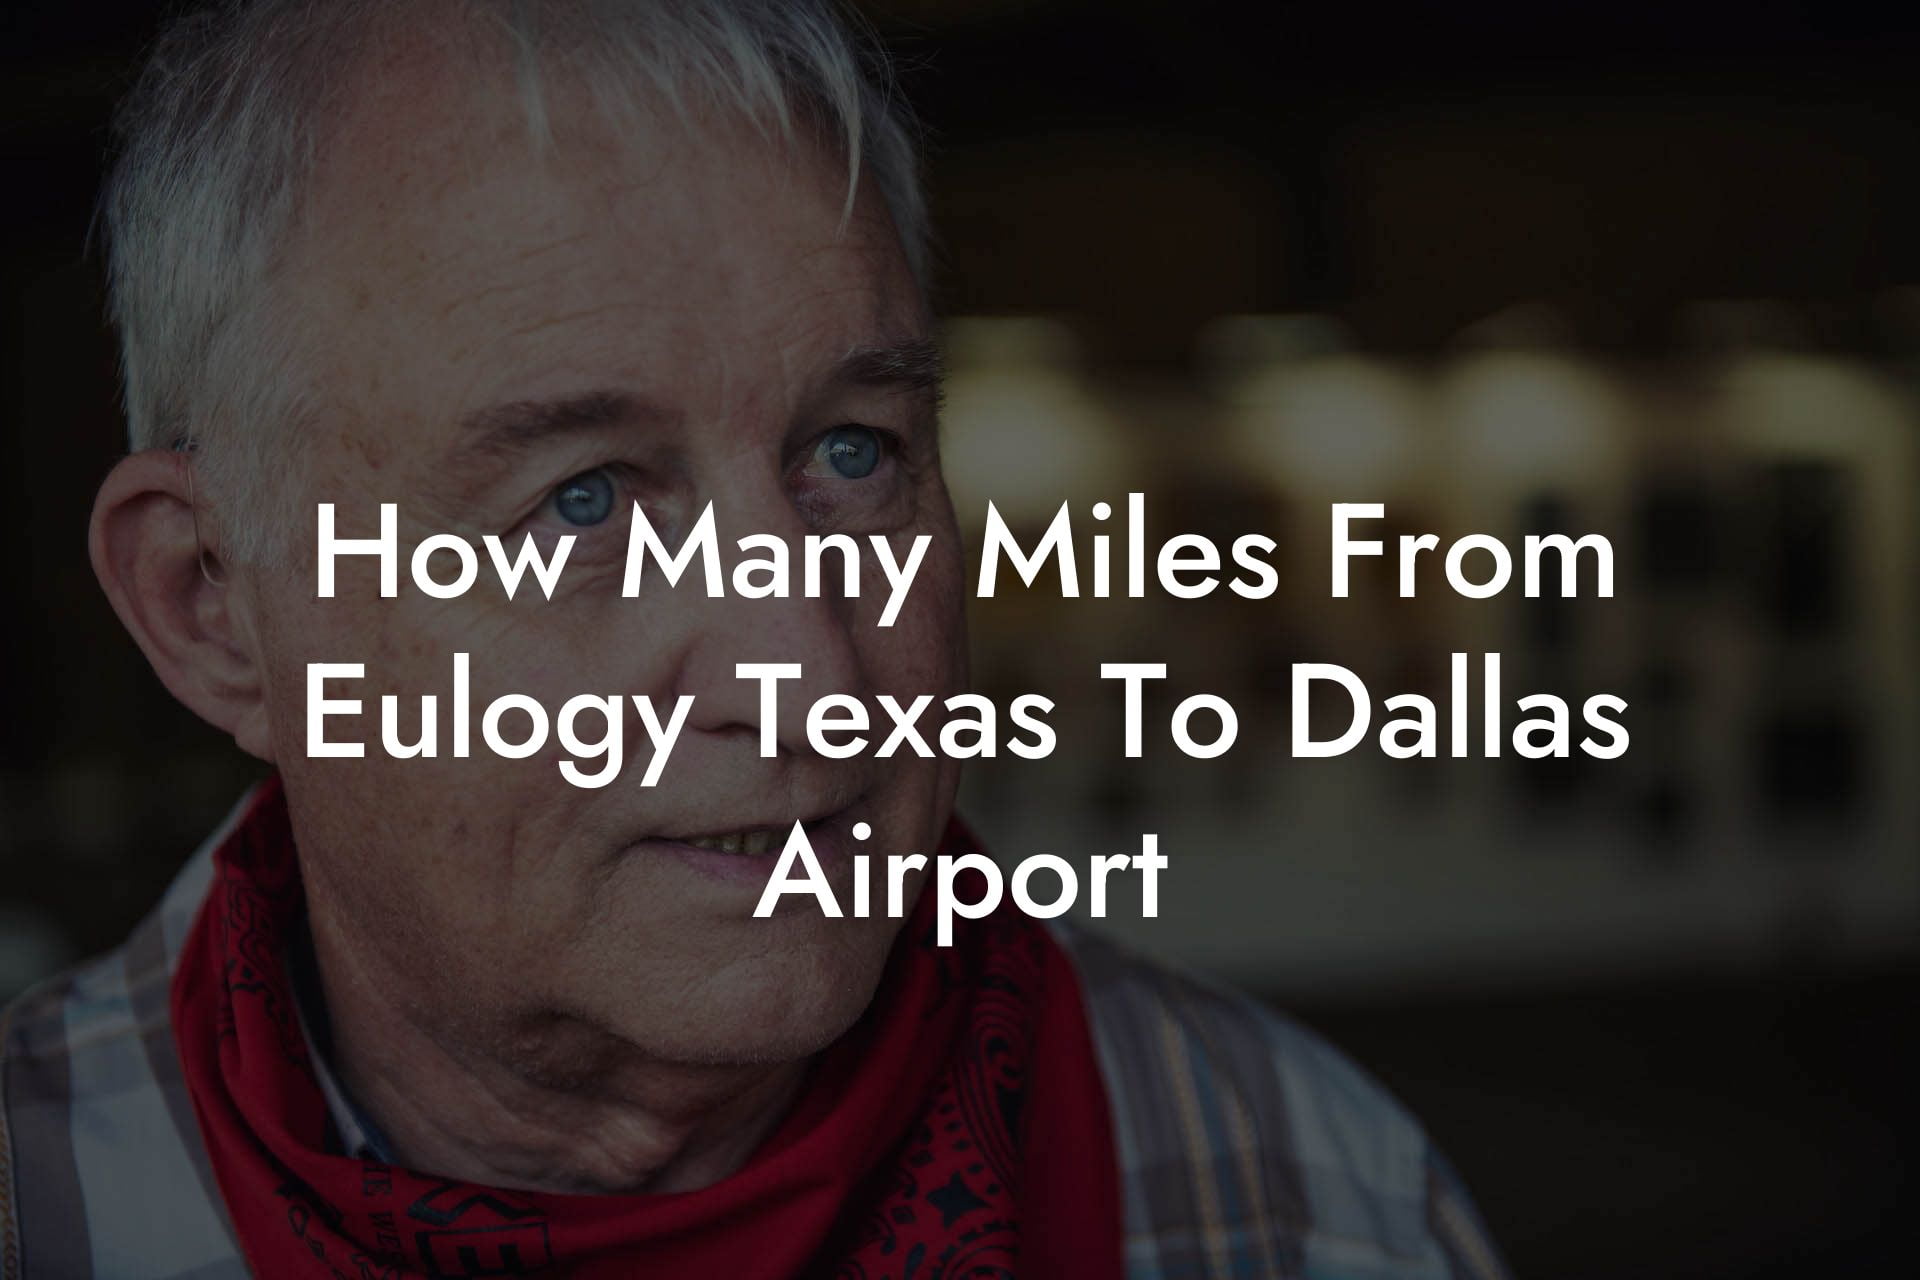 How Many Miles From Eulogy Texas To Dallas Airport